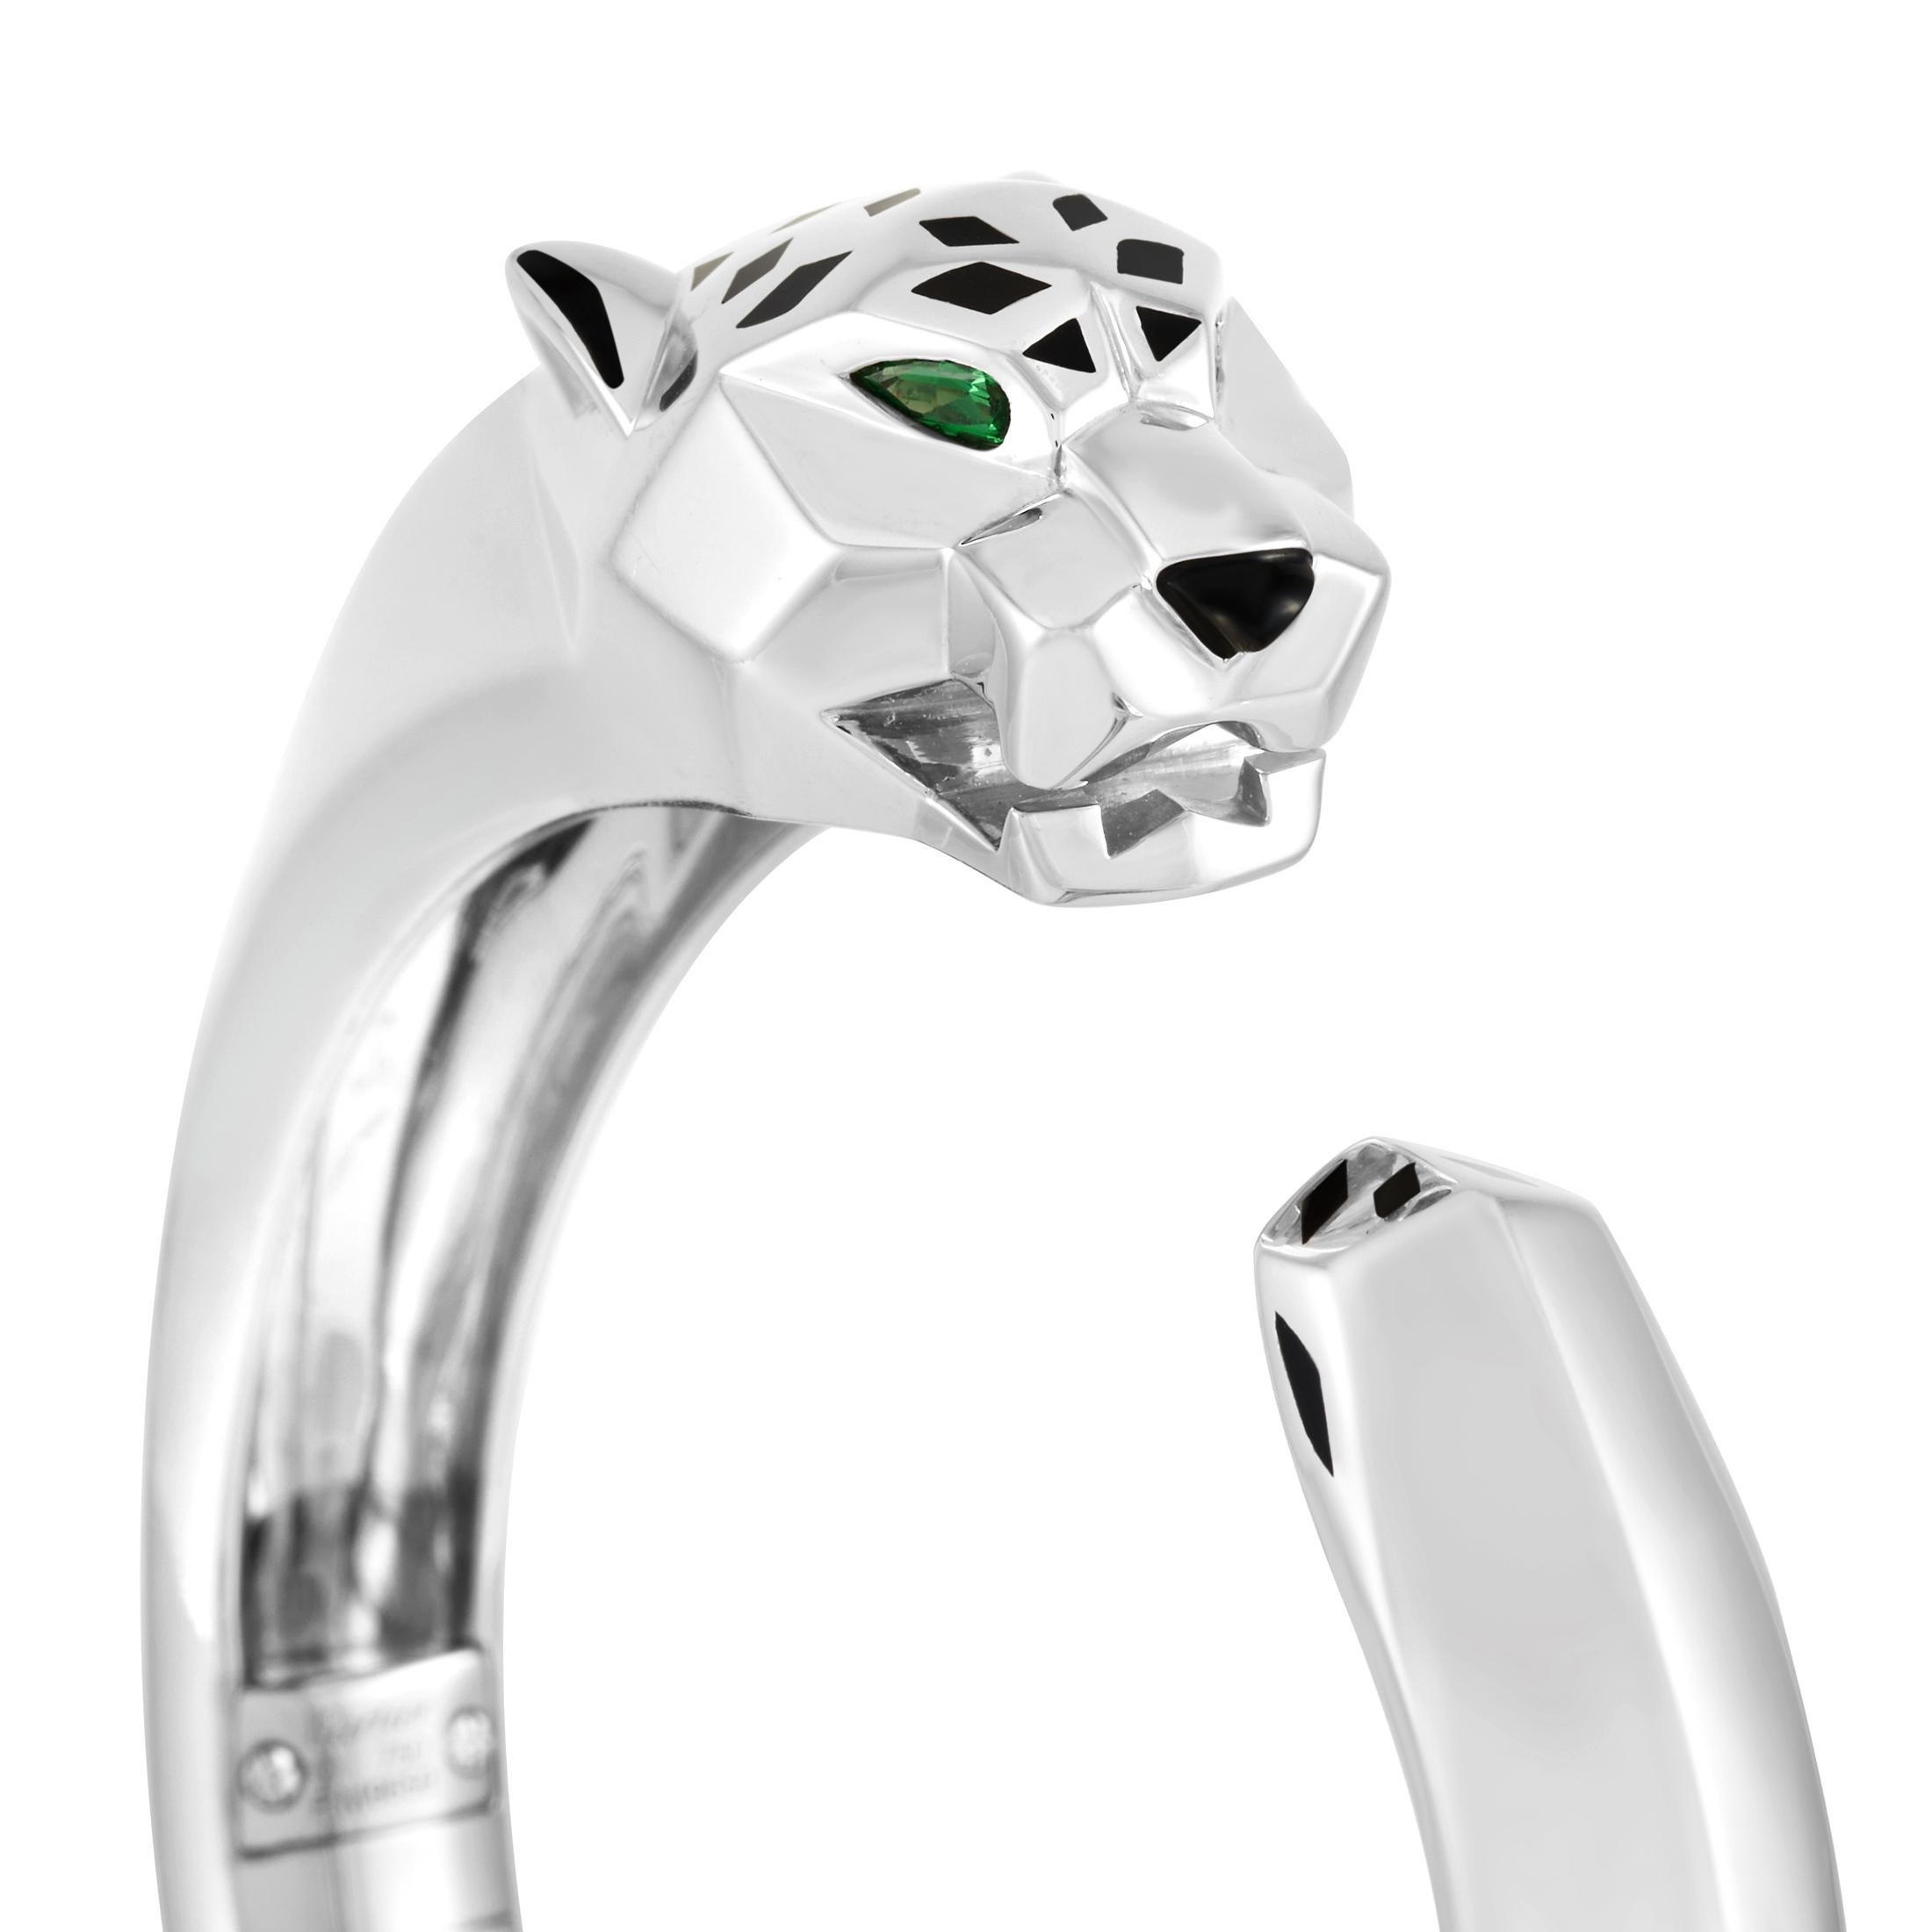 From Cartier's iconic Panthère collection, this open bangle is crafted from 18K white gold and weighs 93 grams. The mythical animal accent features emerald eyes and an onyx nose. This stunning bracelet will look perfect on the wrist of someone who